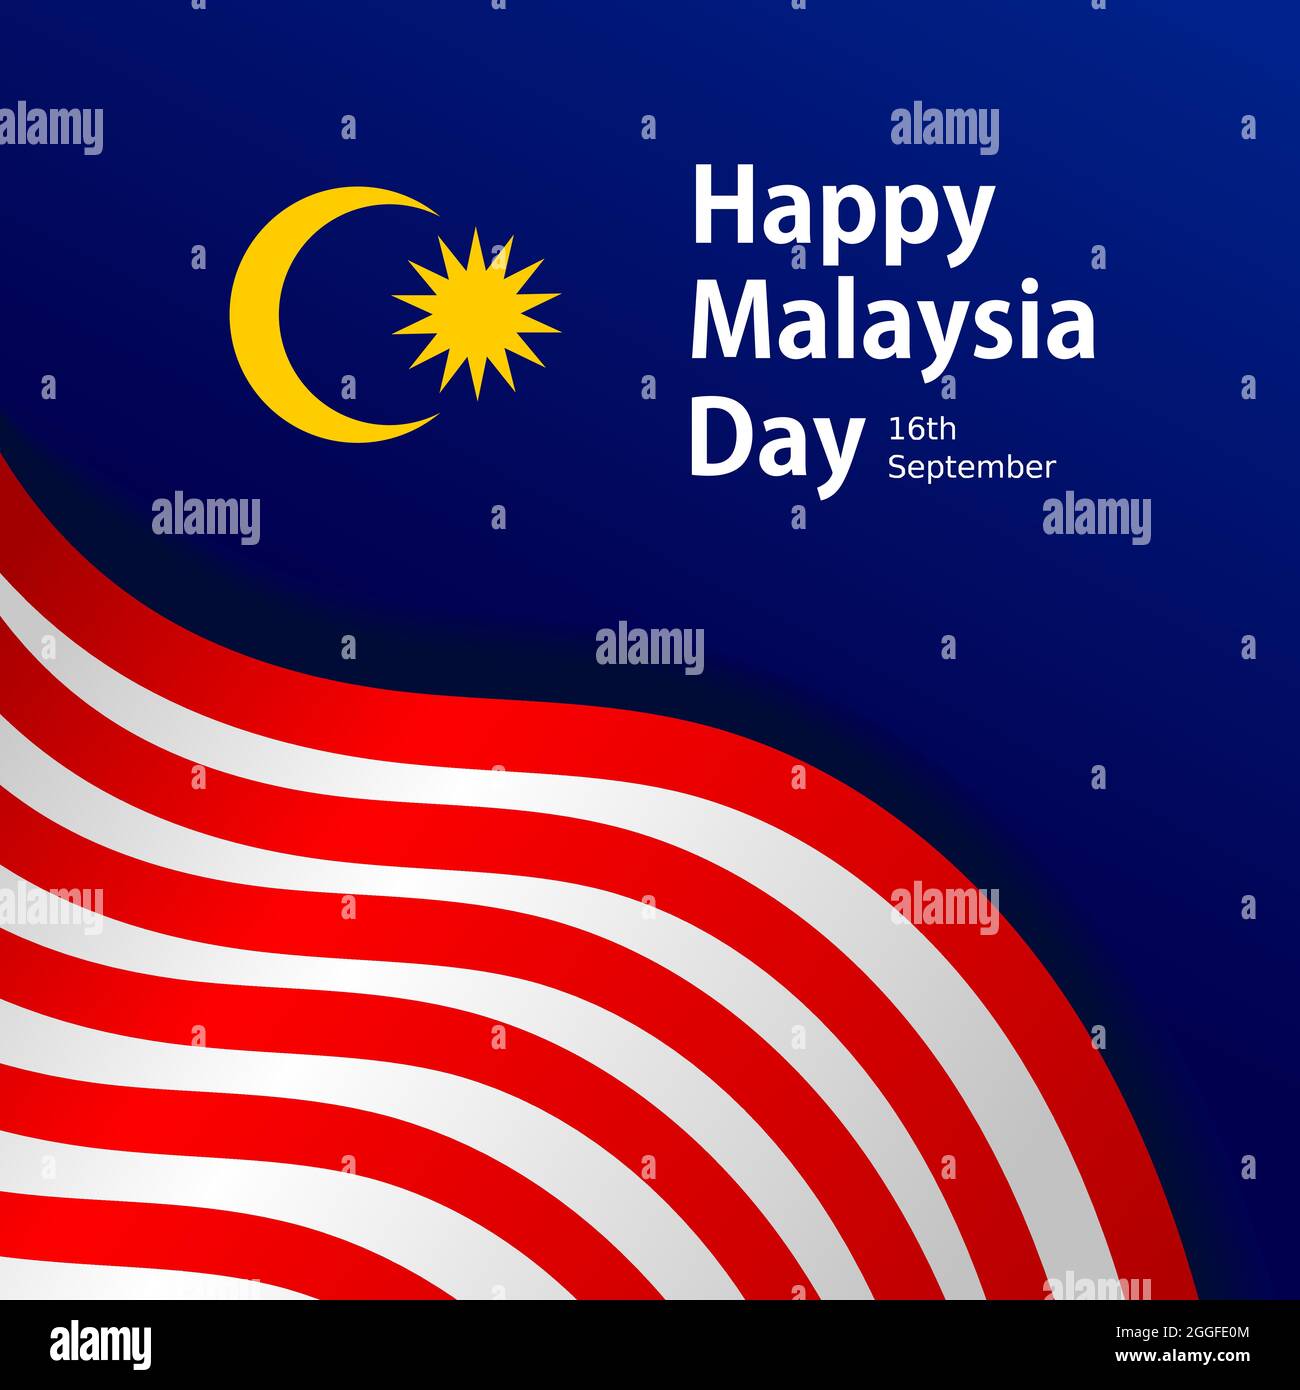 Happy Malaysia Day vector illustration to commemorate Malaysia's National Day on September 16th Stock Vector